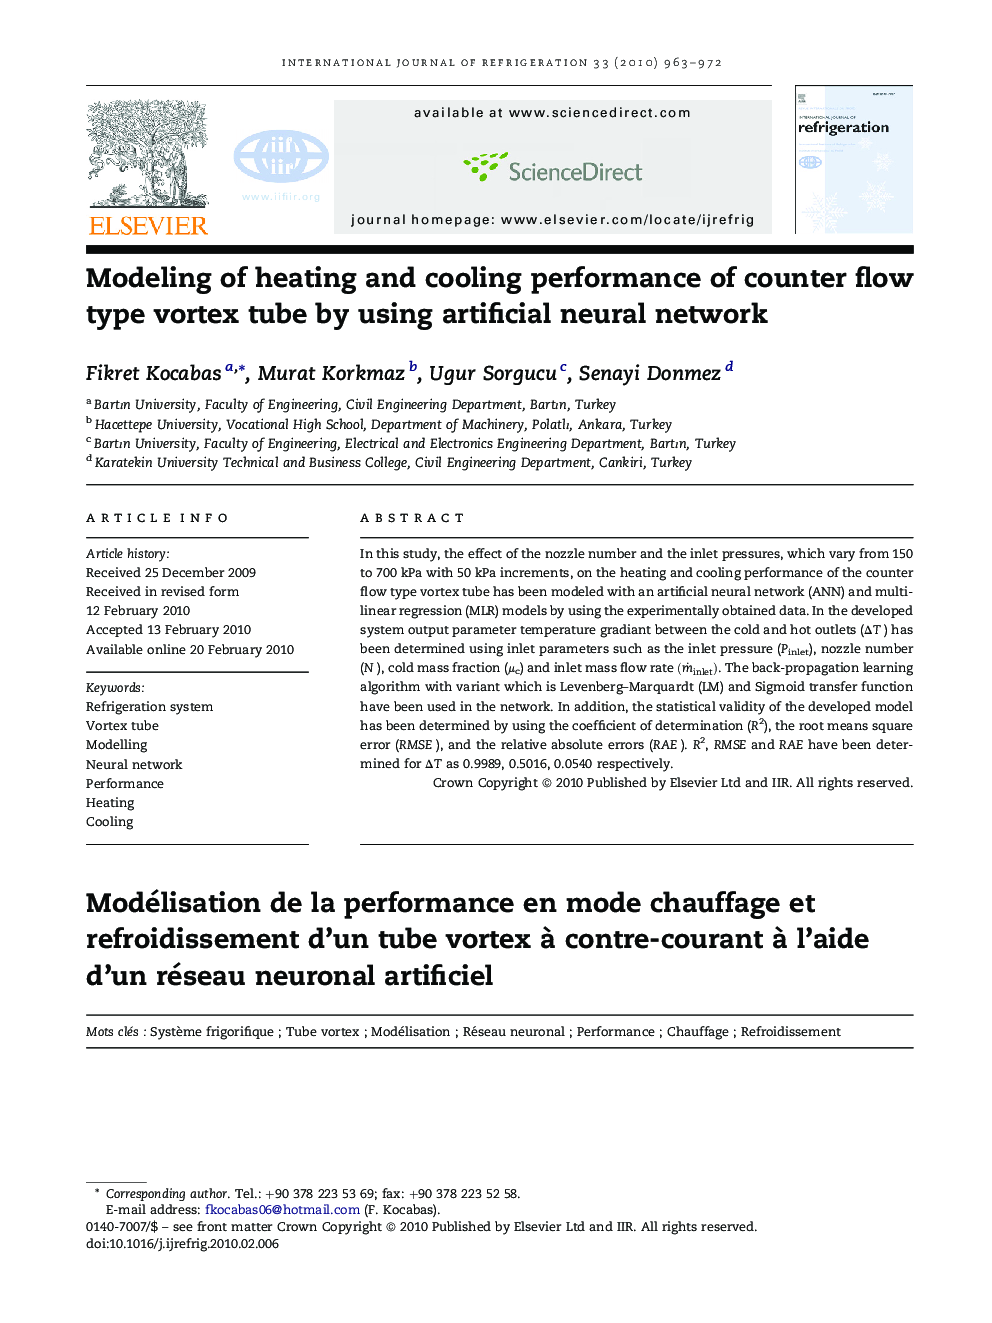 Modeling of heating and cooling performance of counter flow type vortex tube by using artificial neural network